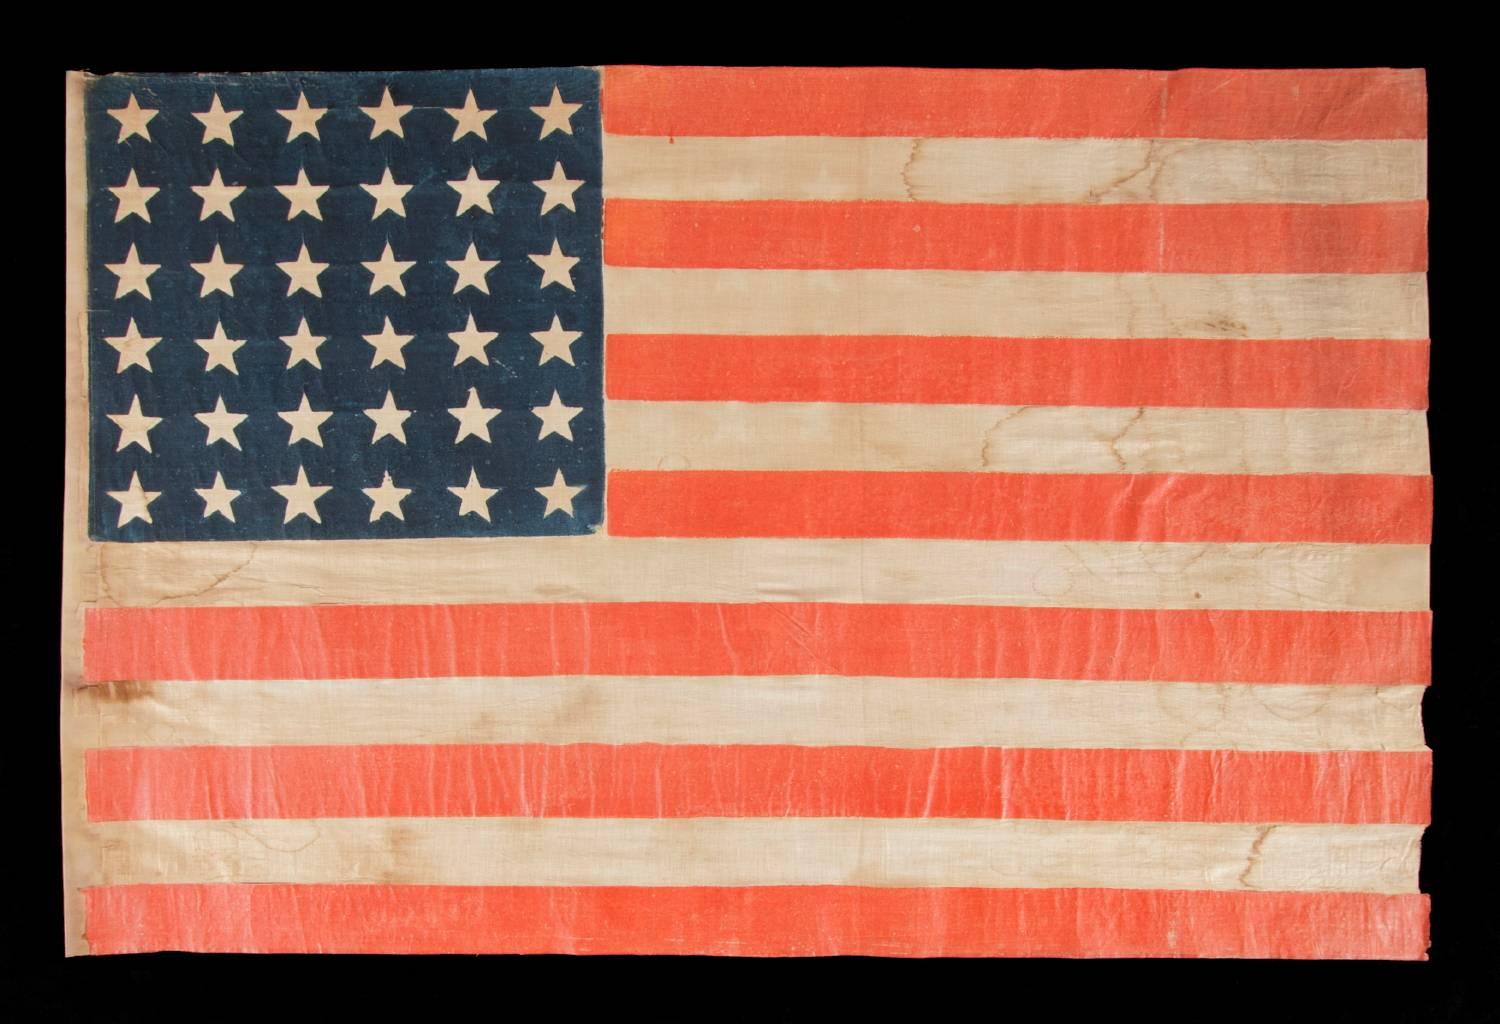 36 star antique American parade flag of the civil war era, in an especially large-scale and with bold color, 1864-1867, Nevada statehood. 

36 star American national flag of the Civil War era, printed on coarse, glazed cotton. The 36th state,